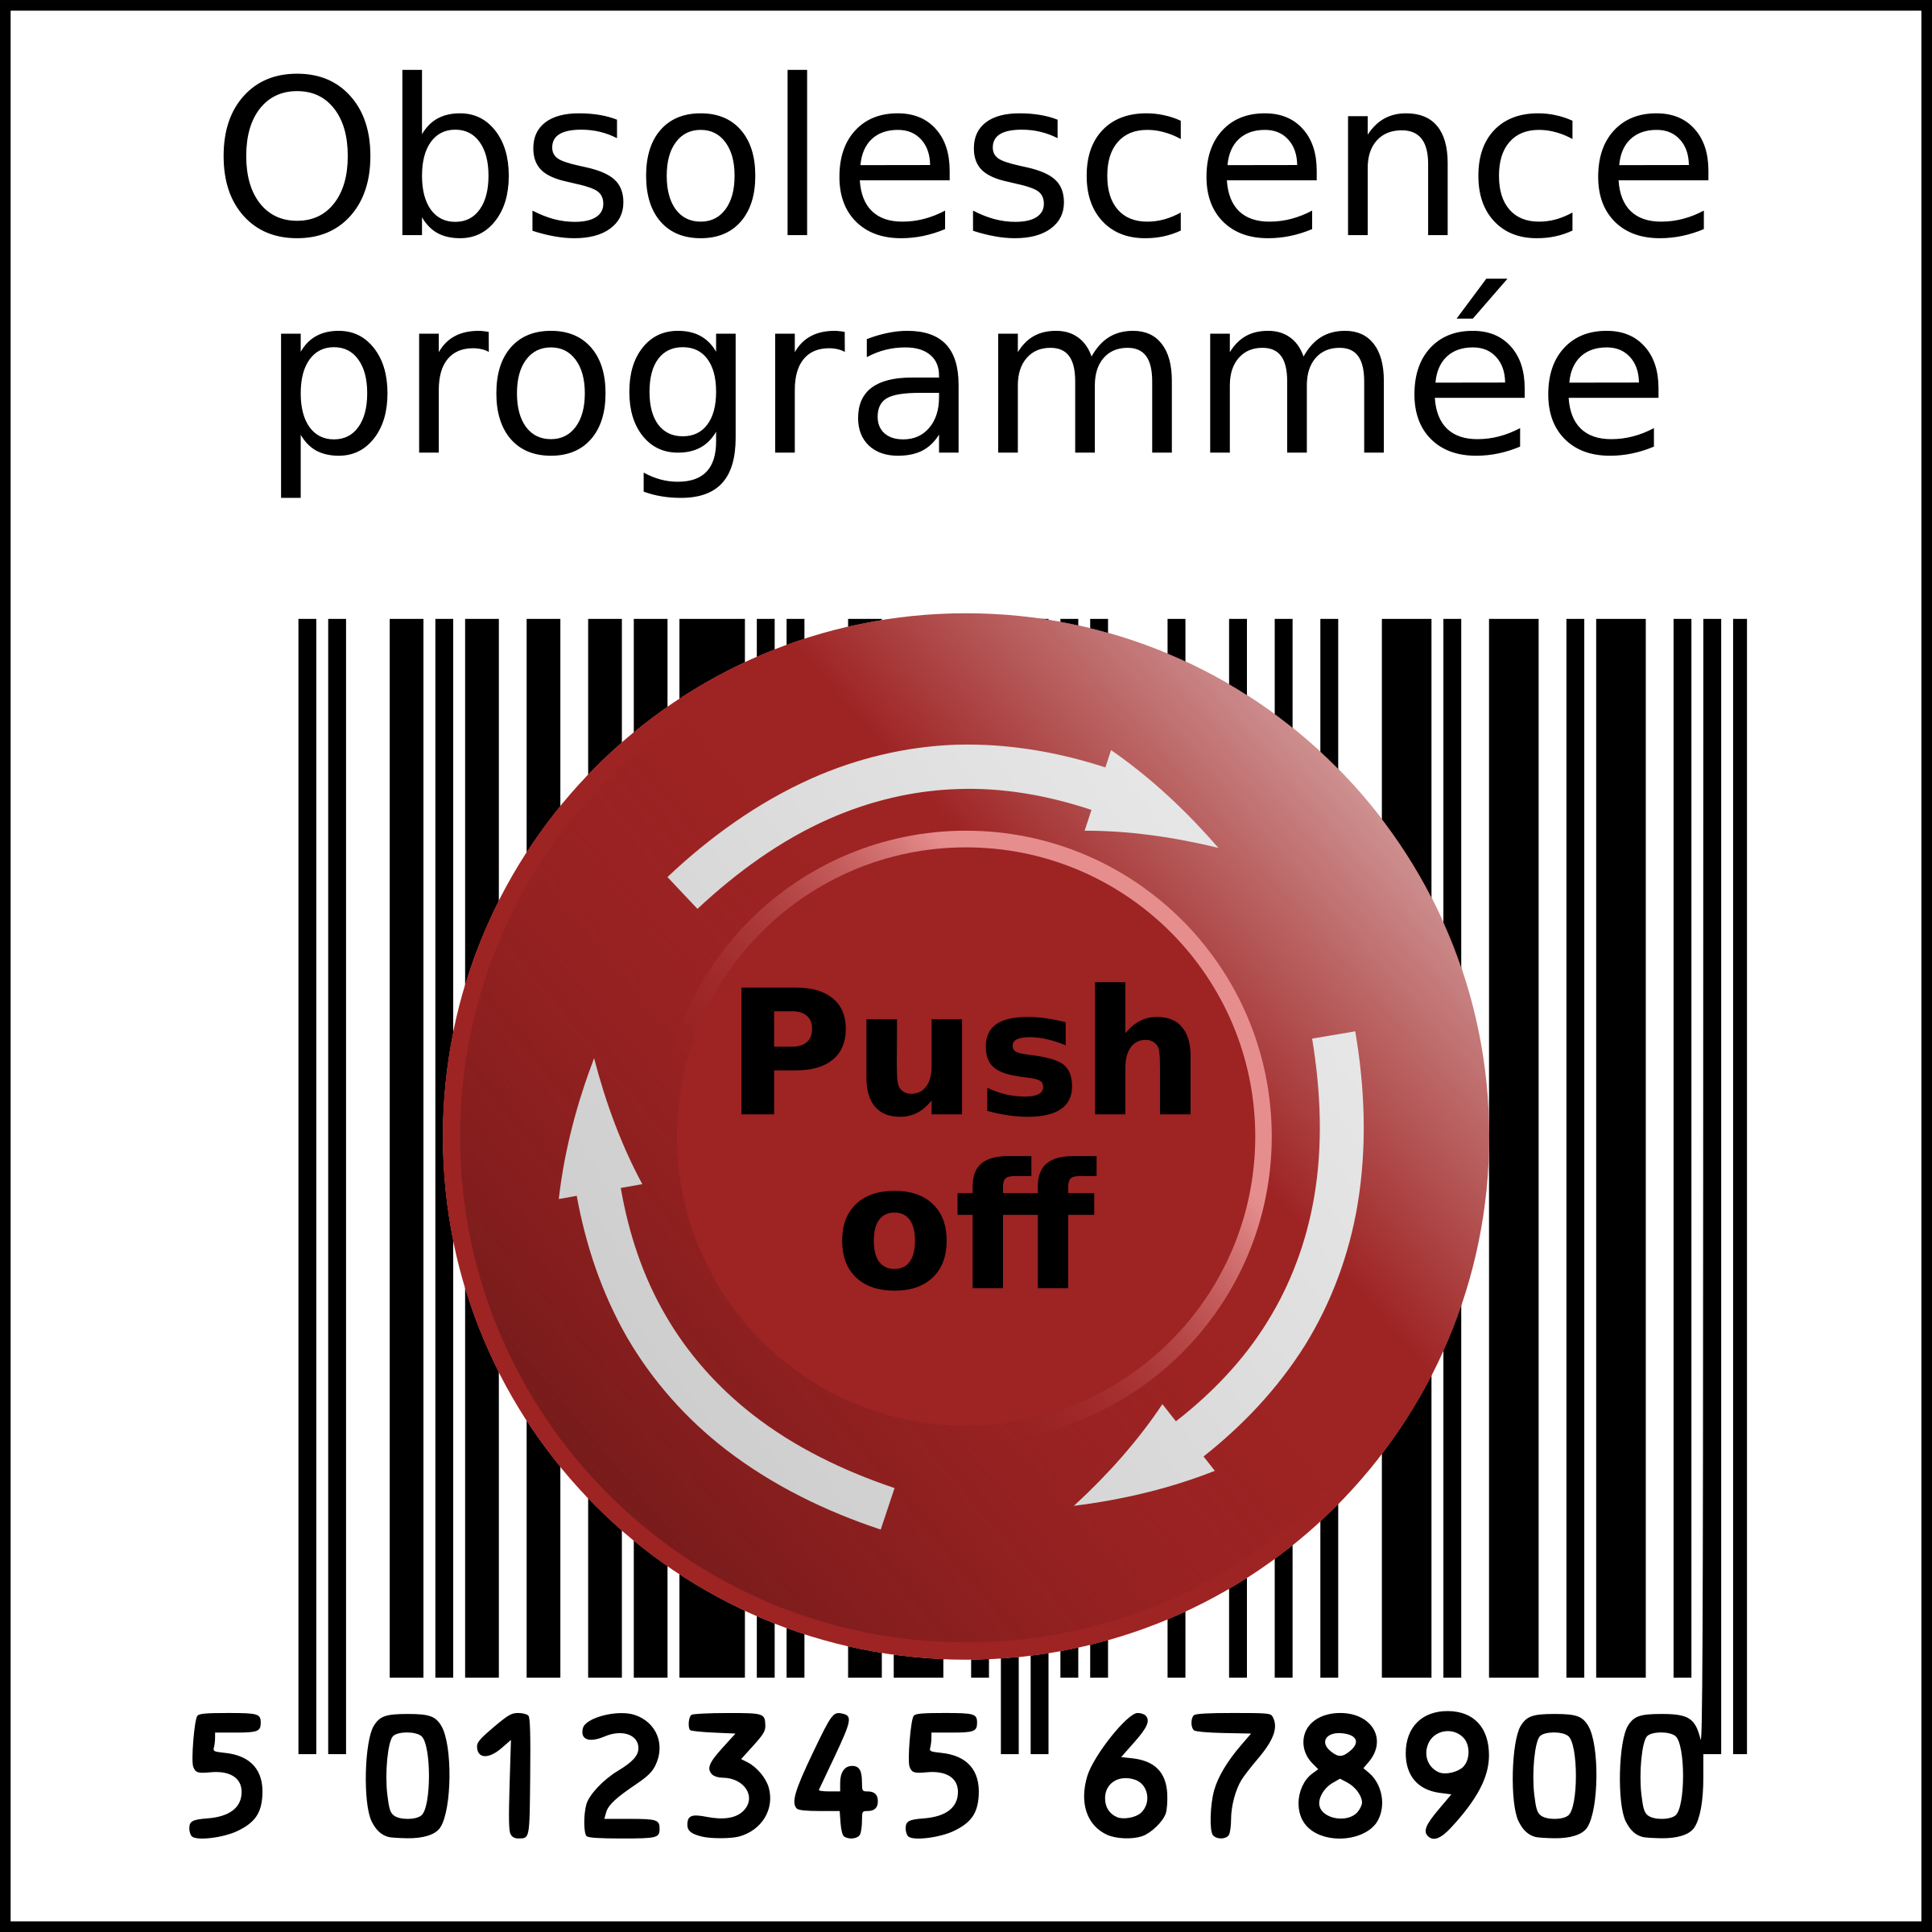 Planned obsolescence barcode in squarre with Emergency Push off button (French) SVG Clip arts